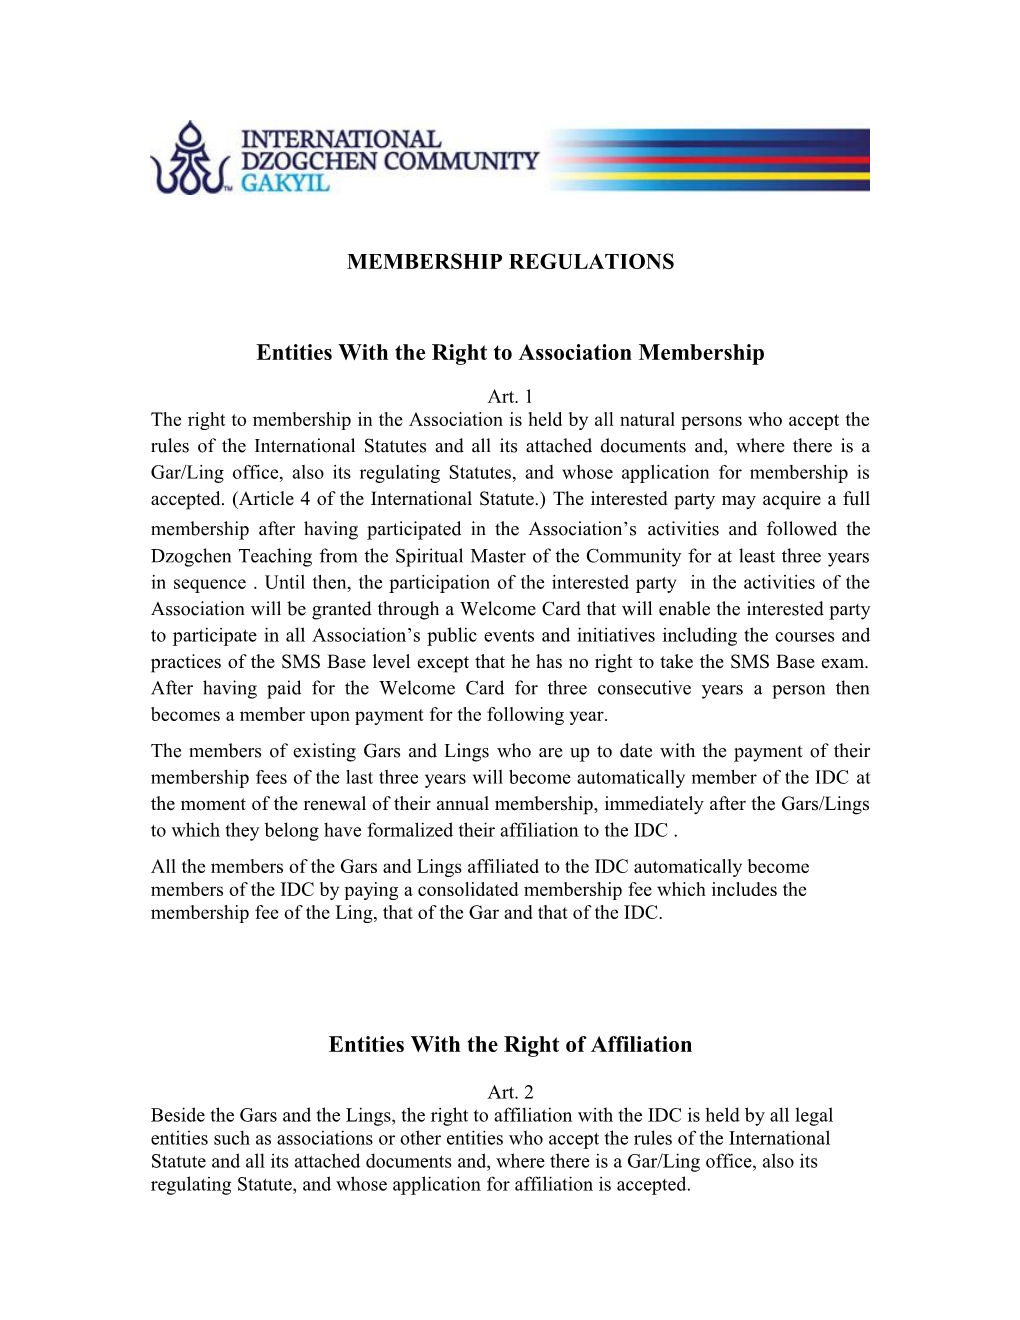 Entities with the Right to Association Membership